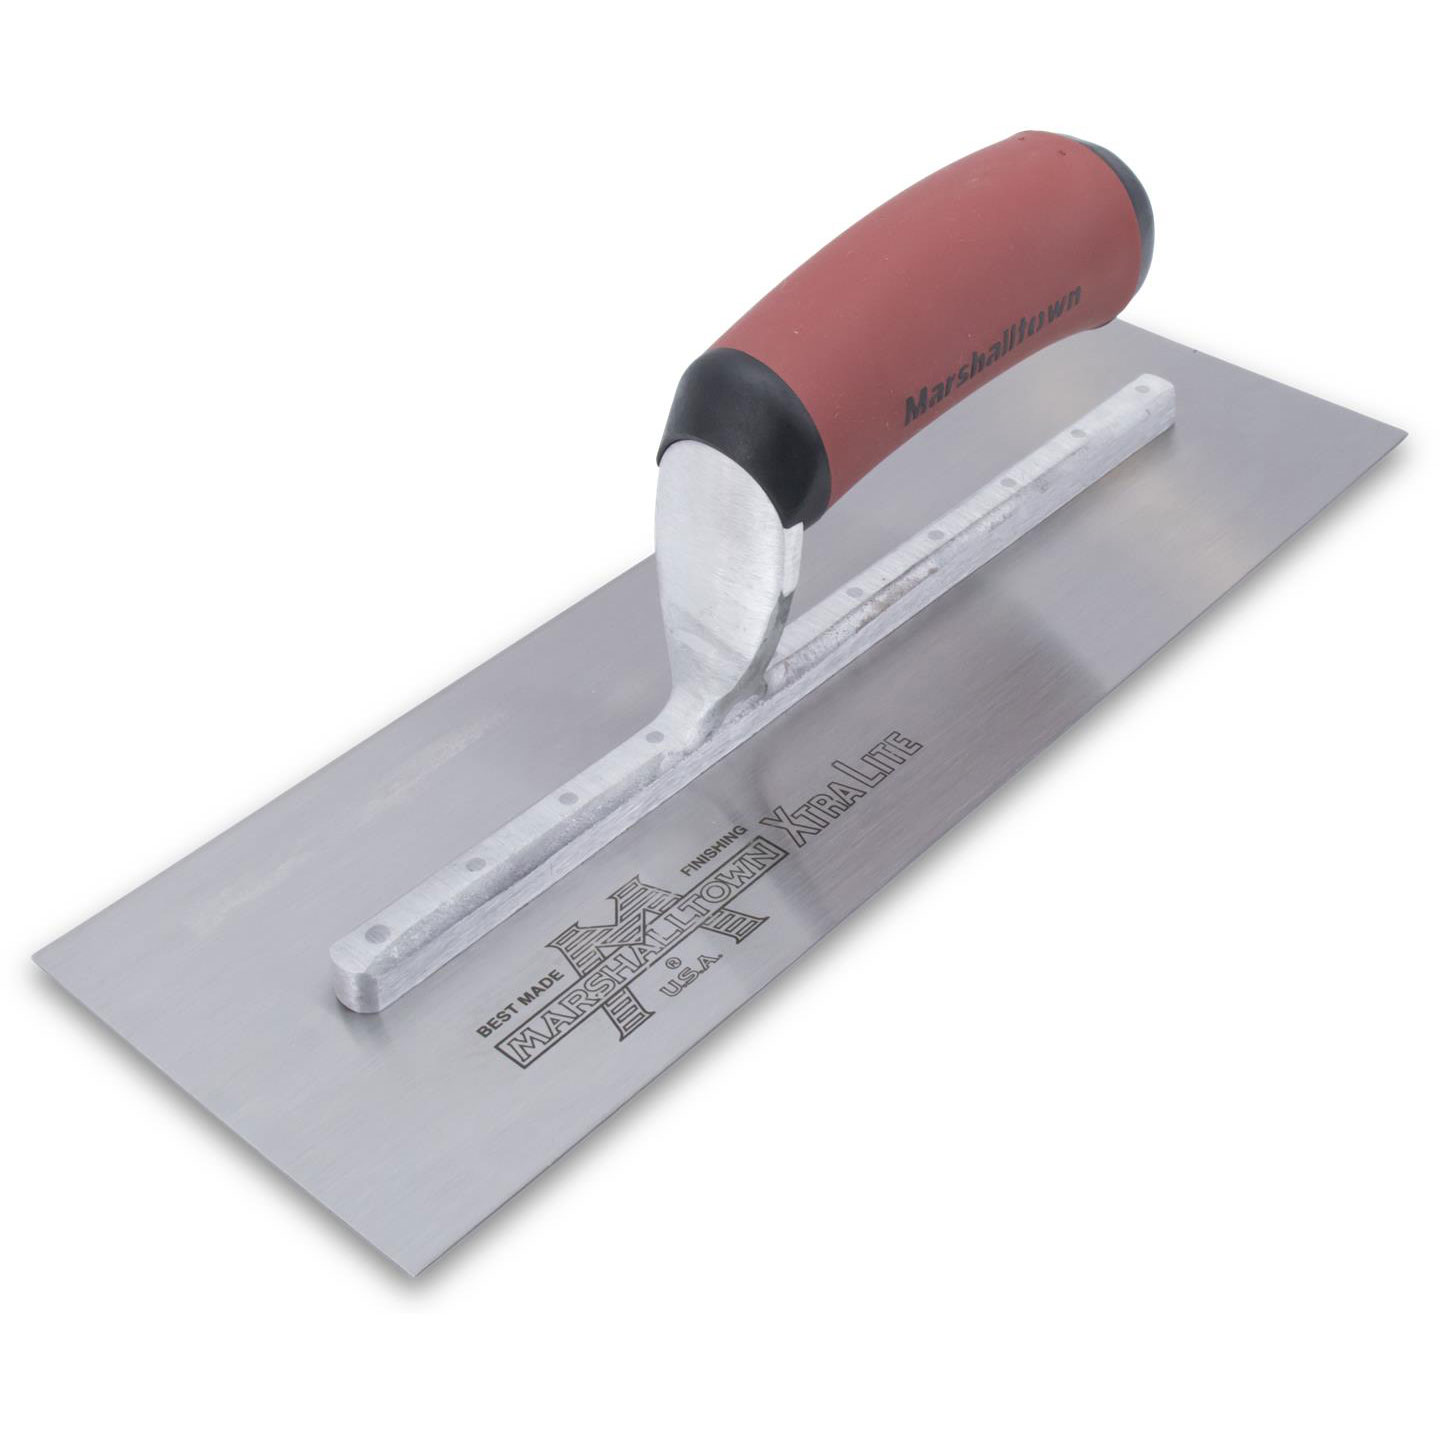 Marshalltown MXS82D 18in x 4-3/4in Finishing Trowel with Curved DuraSoft Handle MXS82D